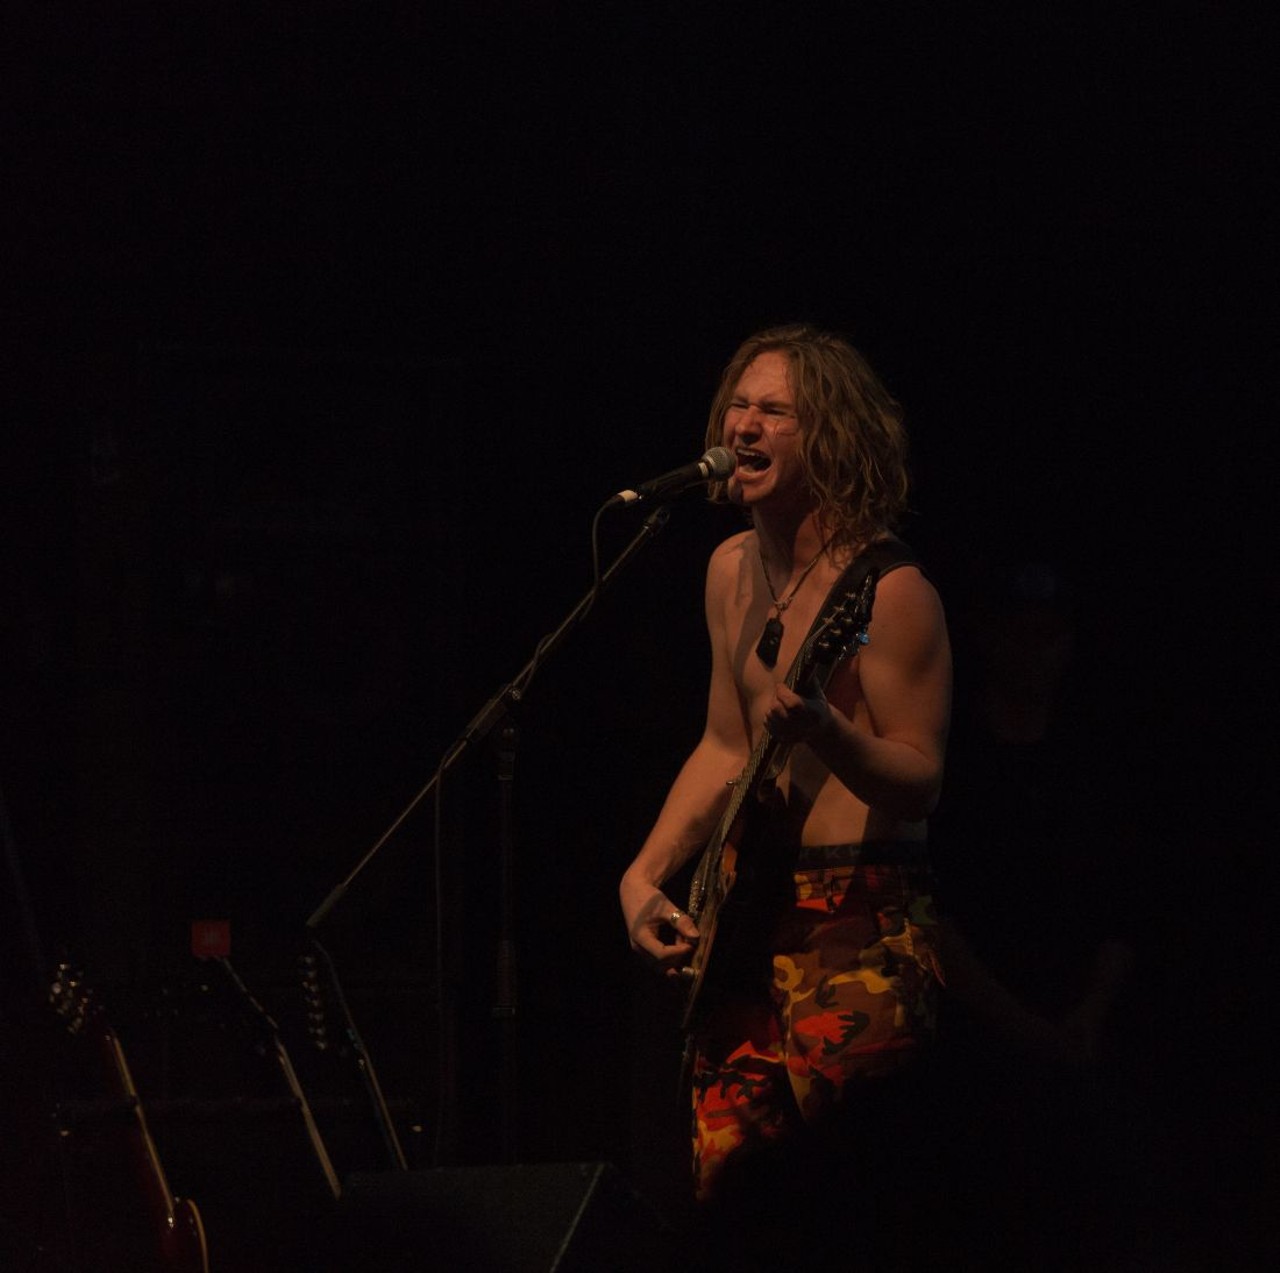 Ministry and Alien Weaponry Performing at the Agora